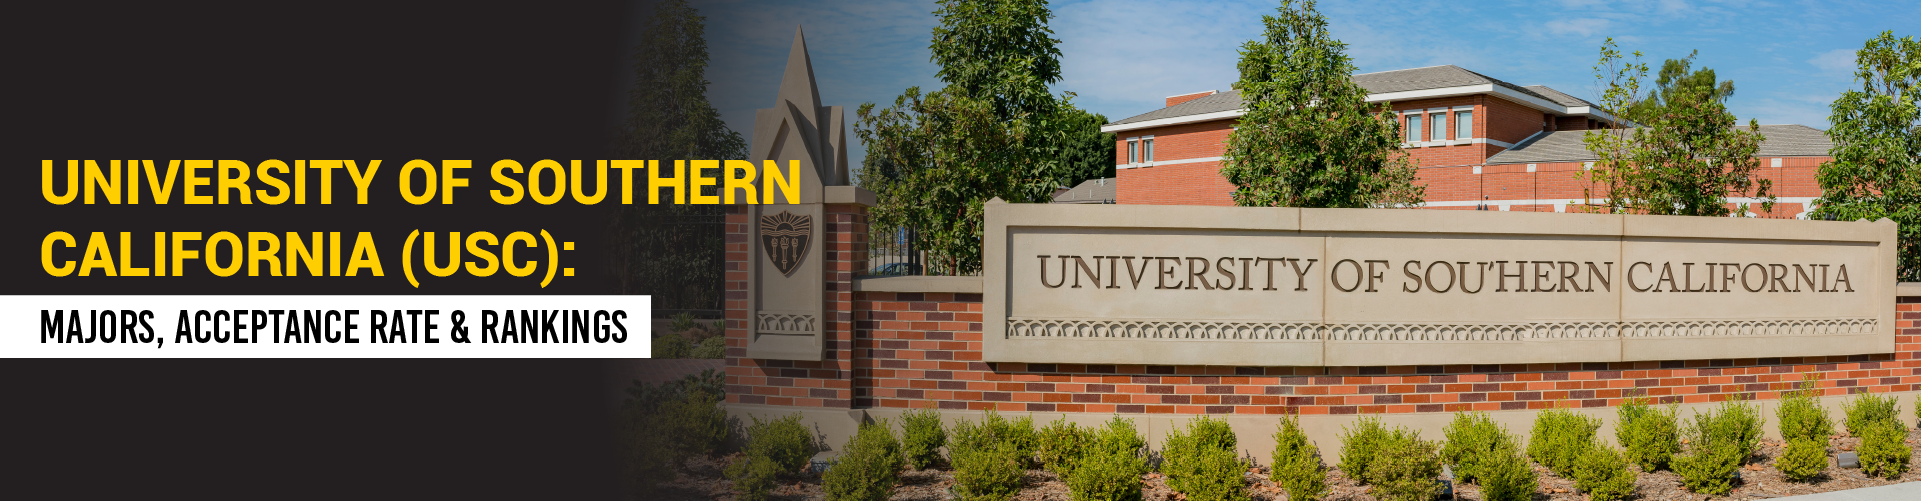 University of Southern California (USC): Majors, Acceptance Rate & Rankings